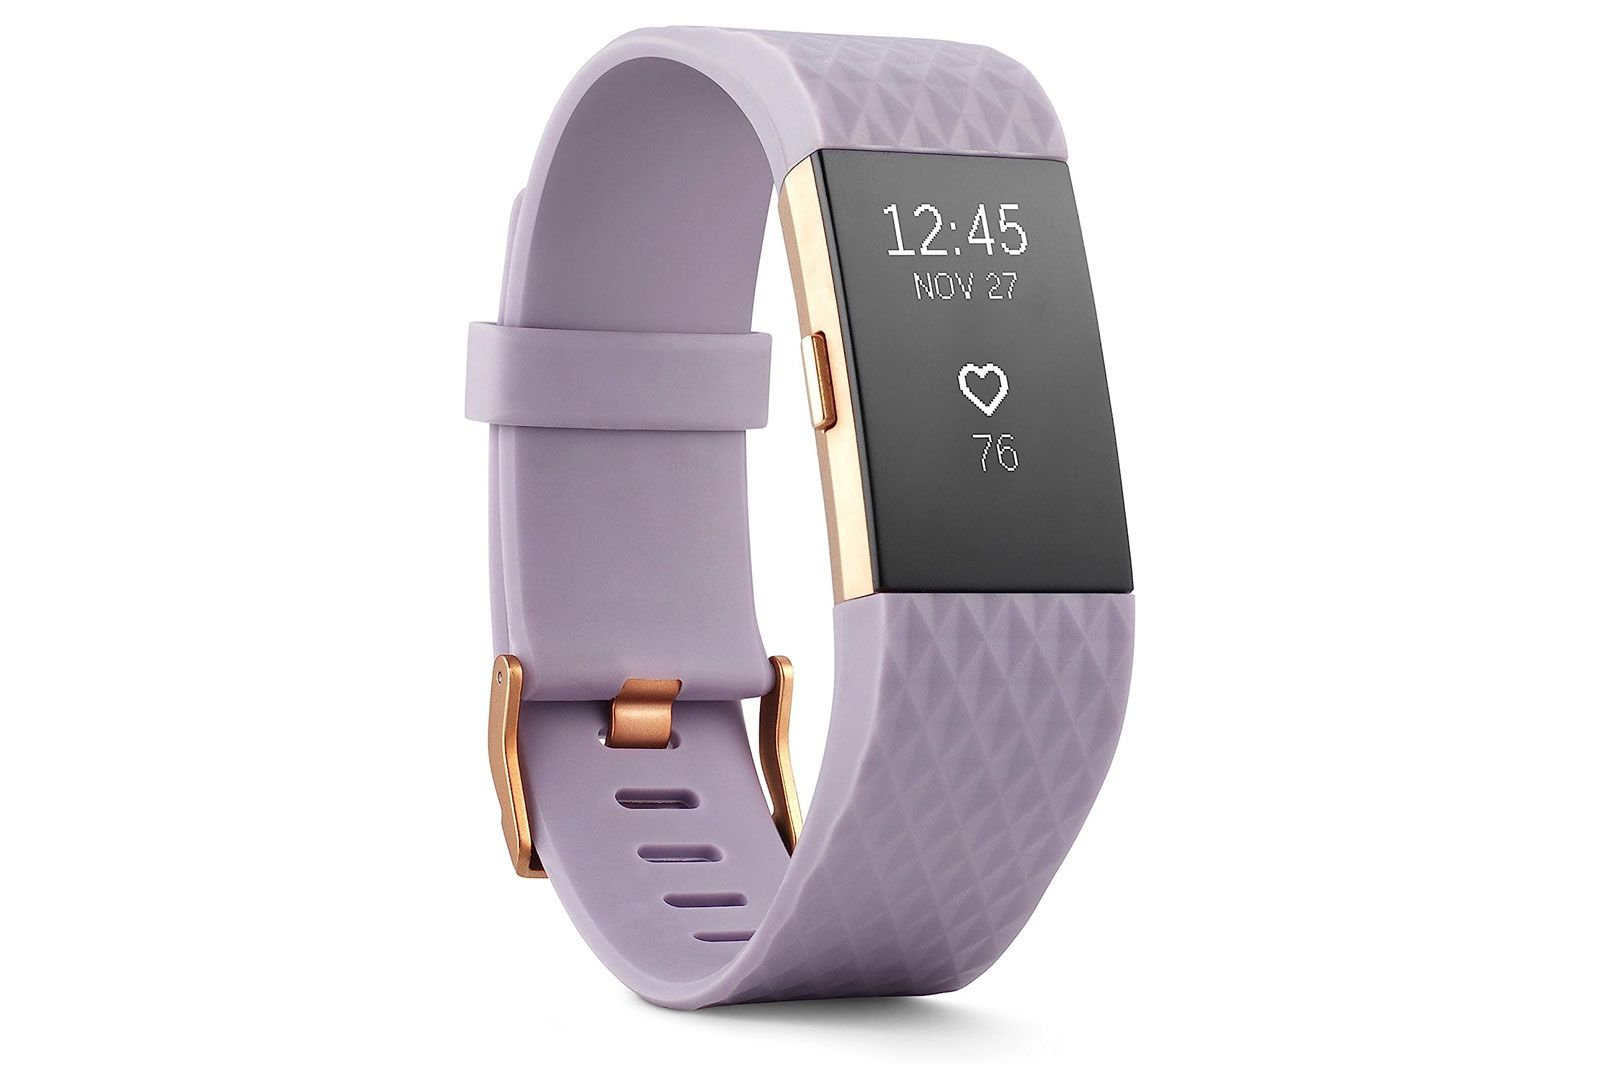 Fitbit Charge 2 Fitness Tracker